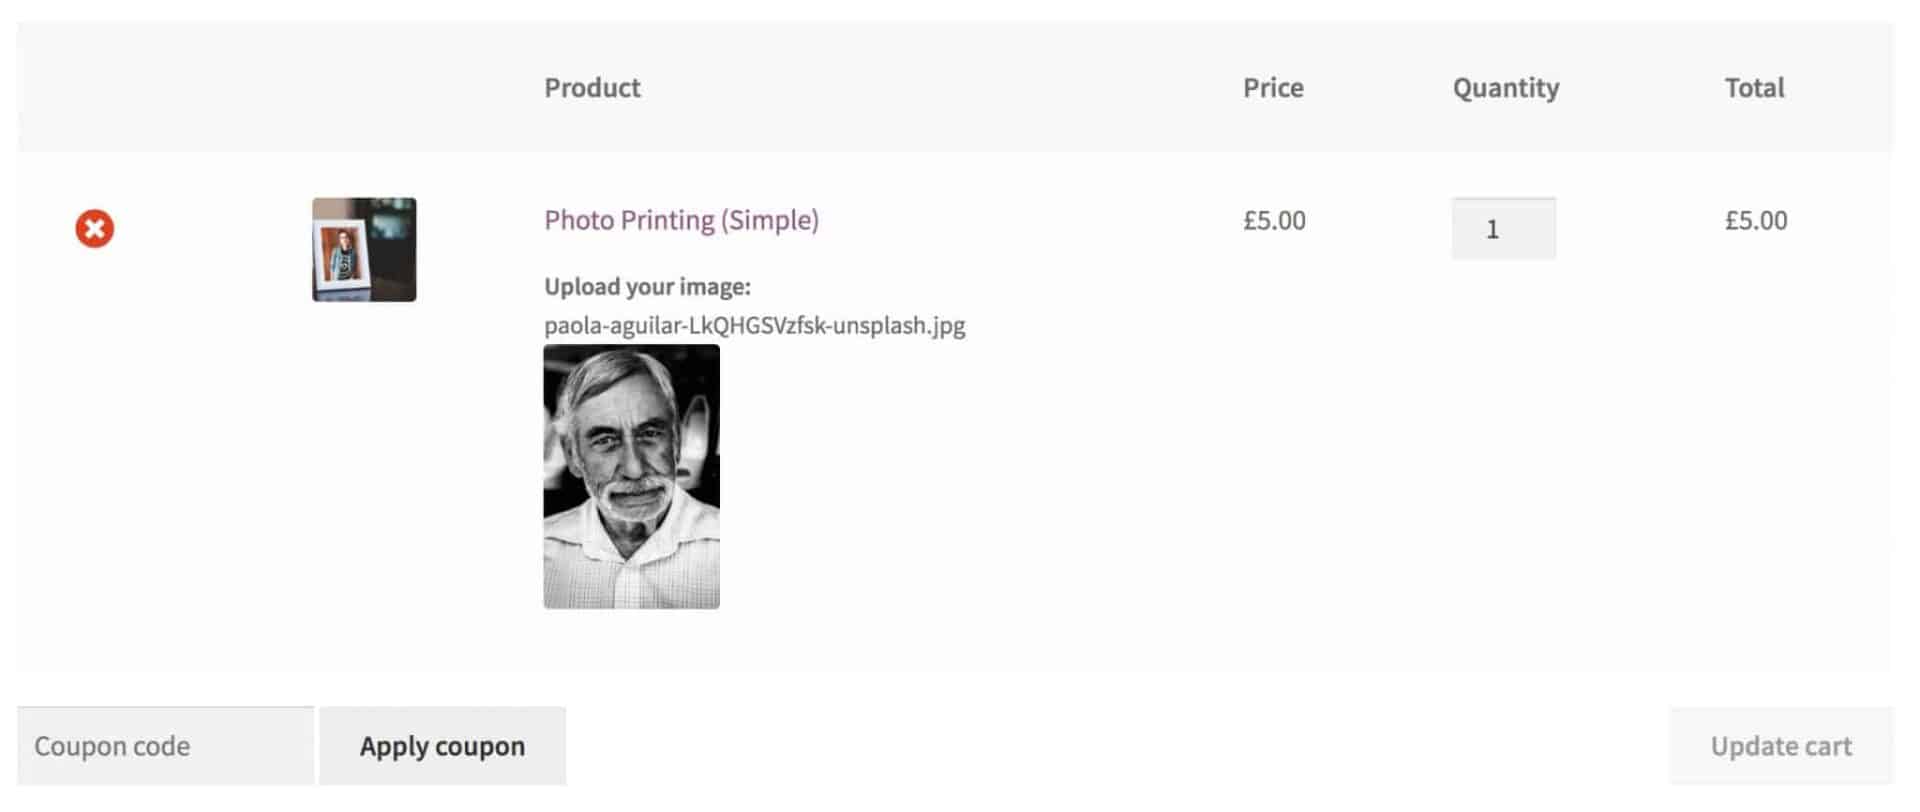 A WooCommerce cart showing an image upload, along with a thumbnail and title.